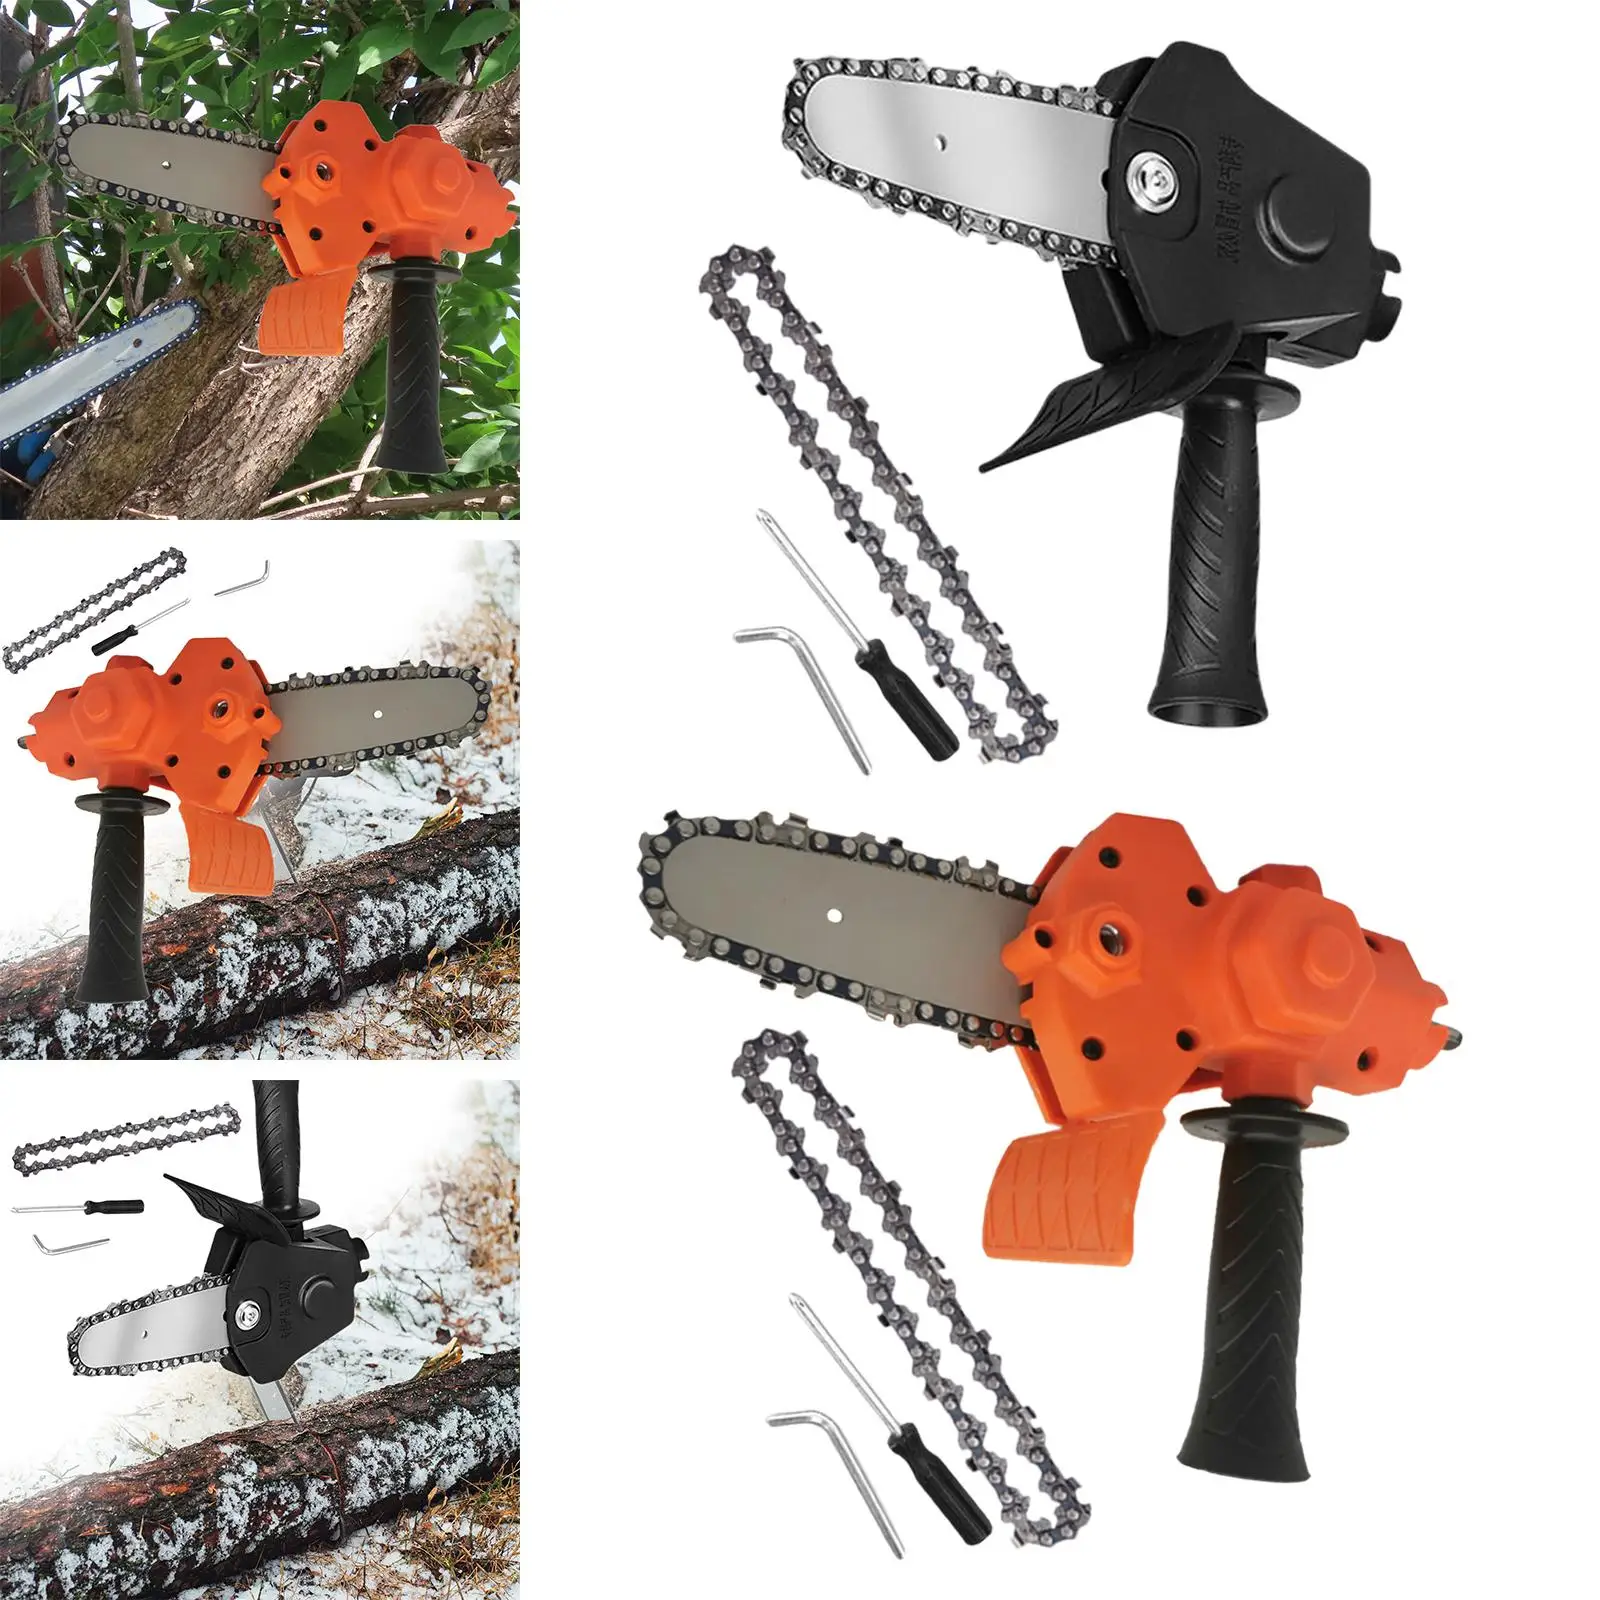 Mini Chainsaw Brackets with Spare Chain Electric Drill into Chain Saw for Garden Farming